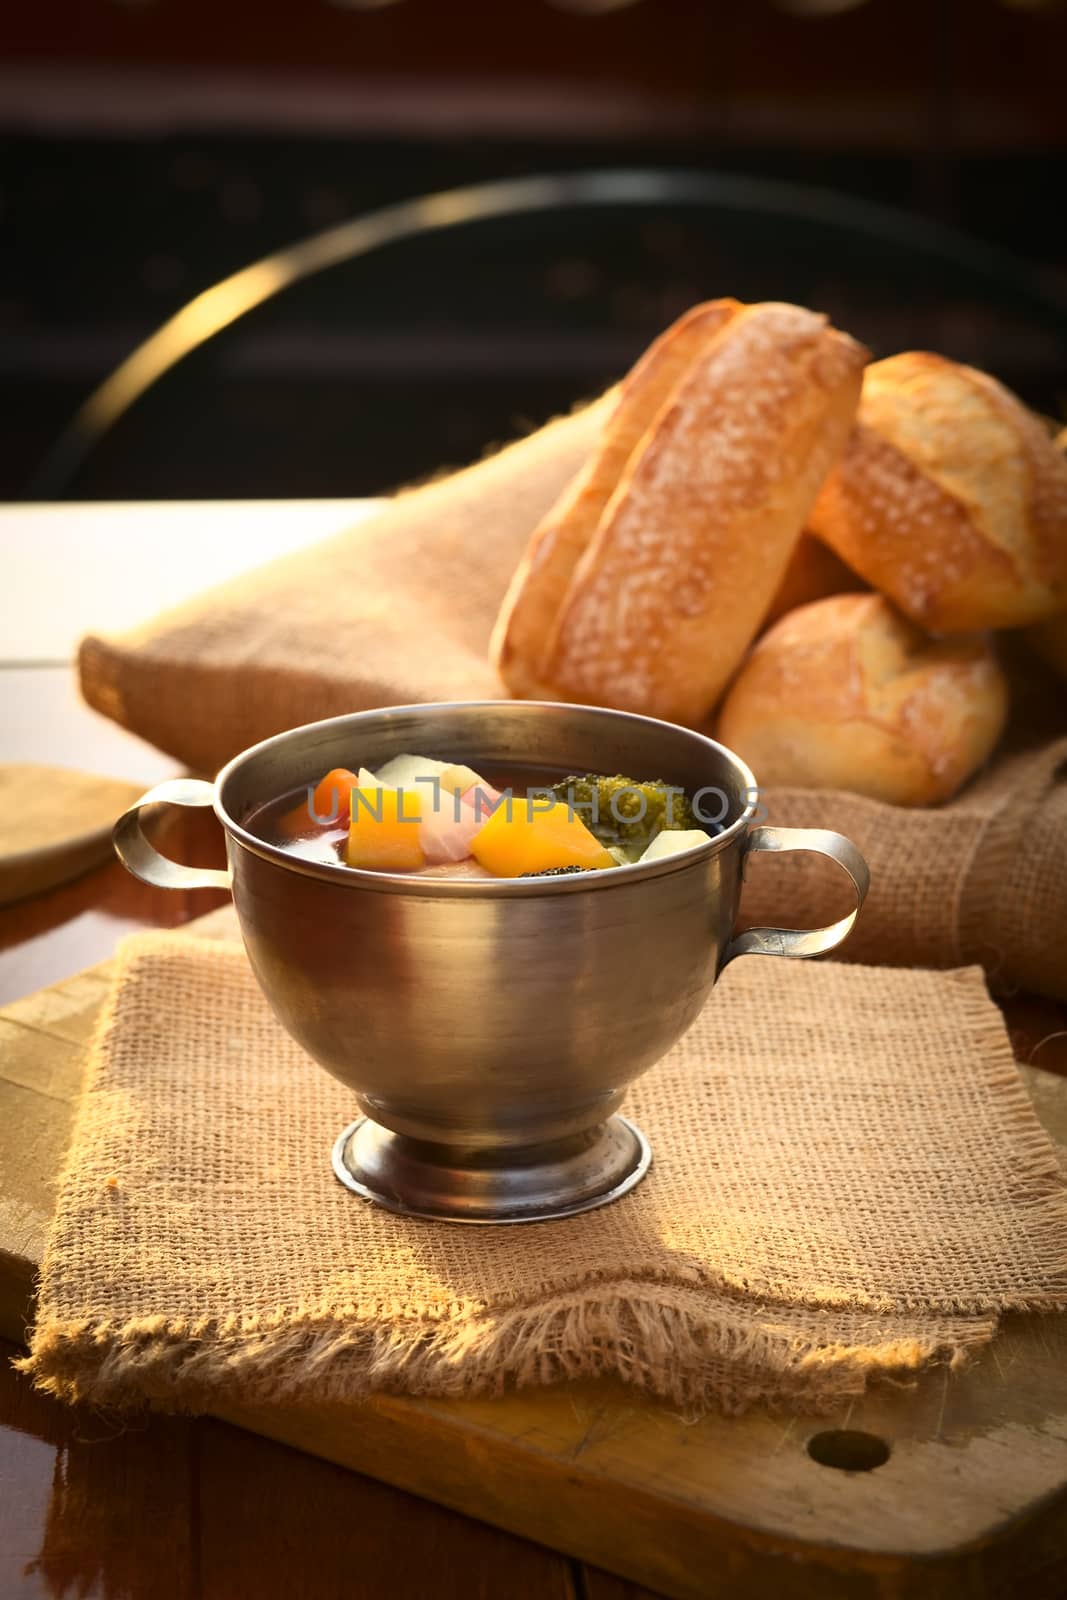 Fresh vegetarian soup made of broccoli, squash, onion, carrot, potato and tomato served in a metal cup on jute cloth and wooden board with ciabatta buns in the back, photographed with natural light (Selective Focus, Focus on the squash pieces in the middle of the soup)